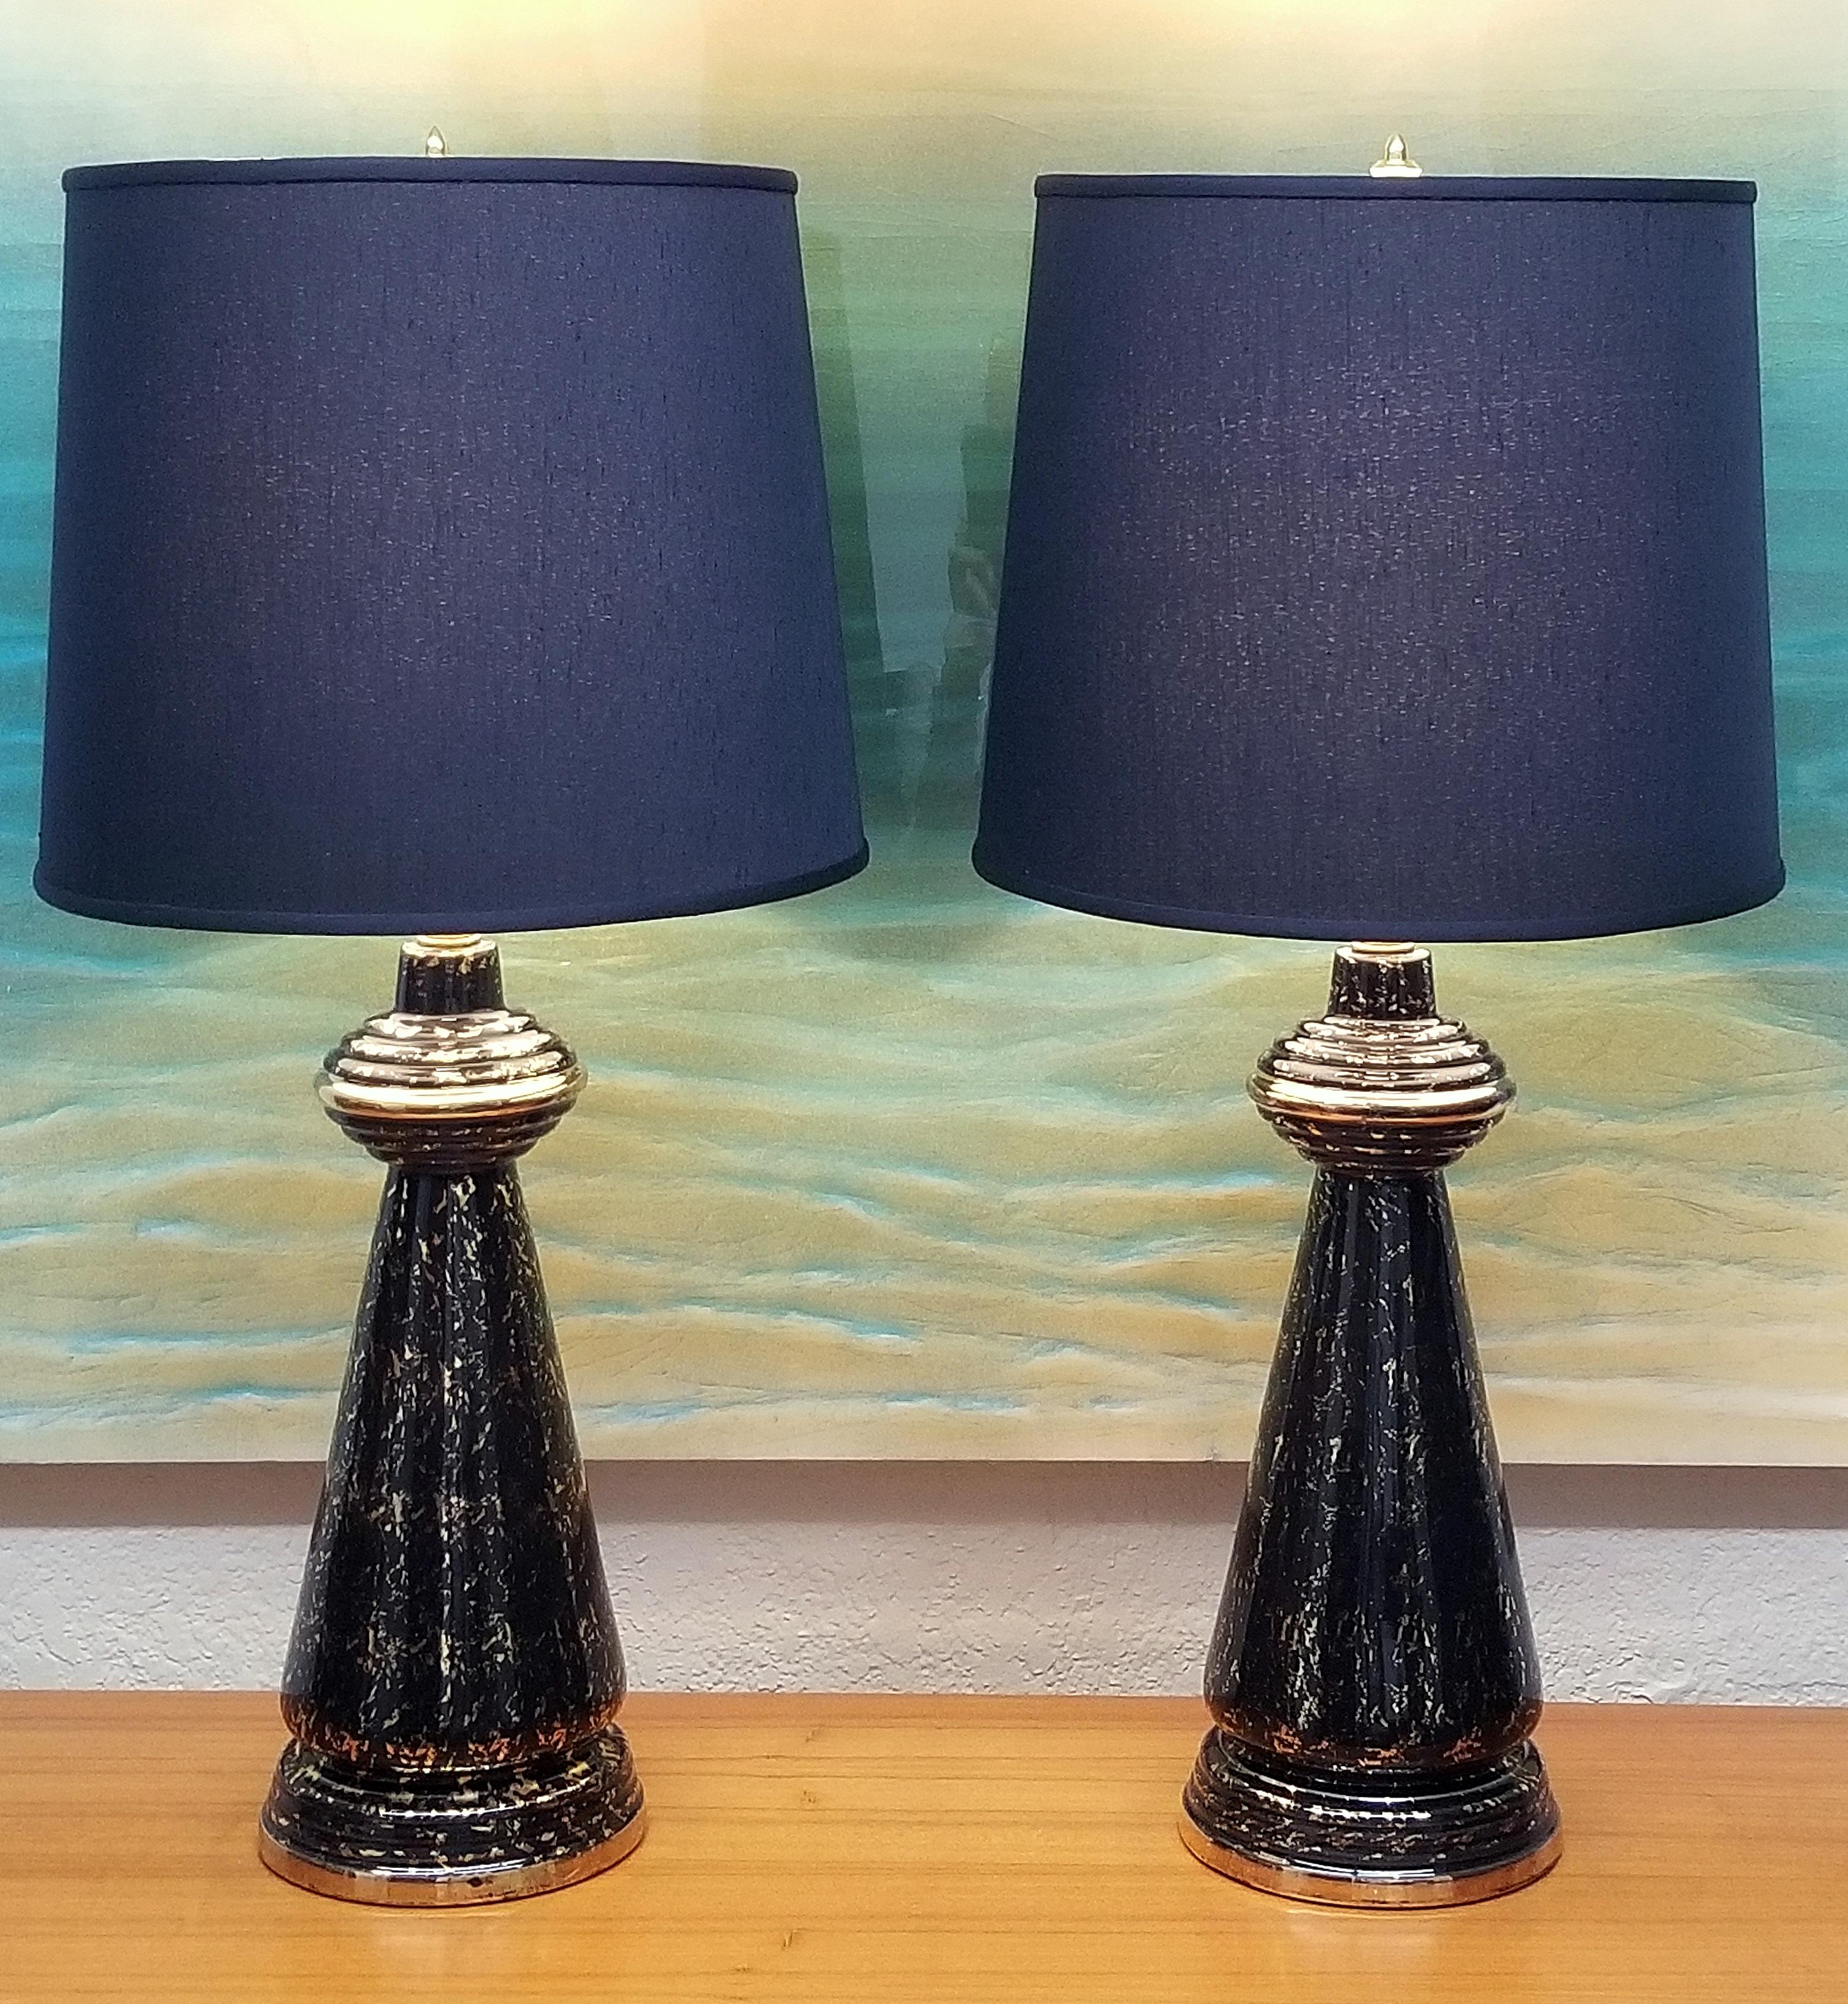 Pair of tall Art Deco black and gold porcelain lamps with new custom black silk shades. The impressive lamps have a fluted circular body in black and gold ceramic with reeded saucer shaped details. Very unique and decorative! Work well with many